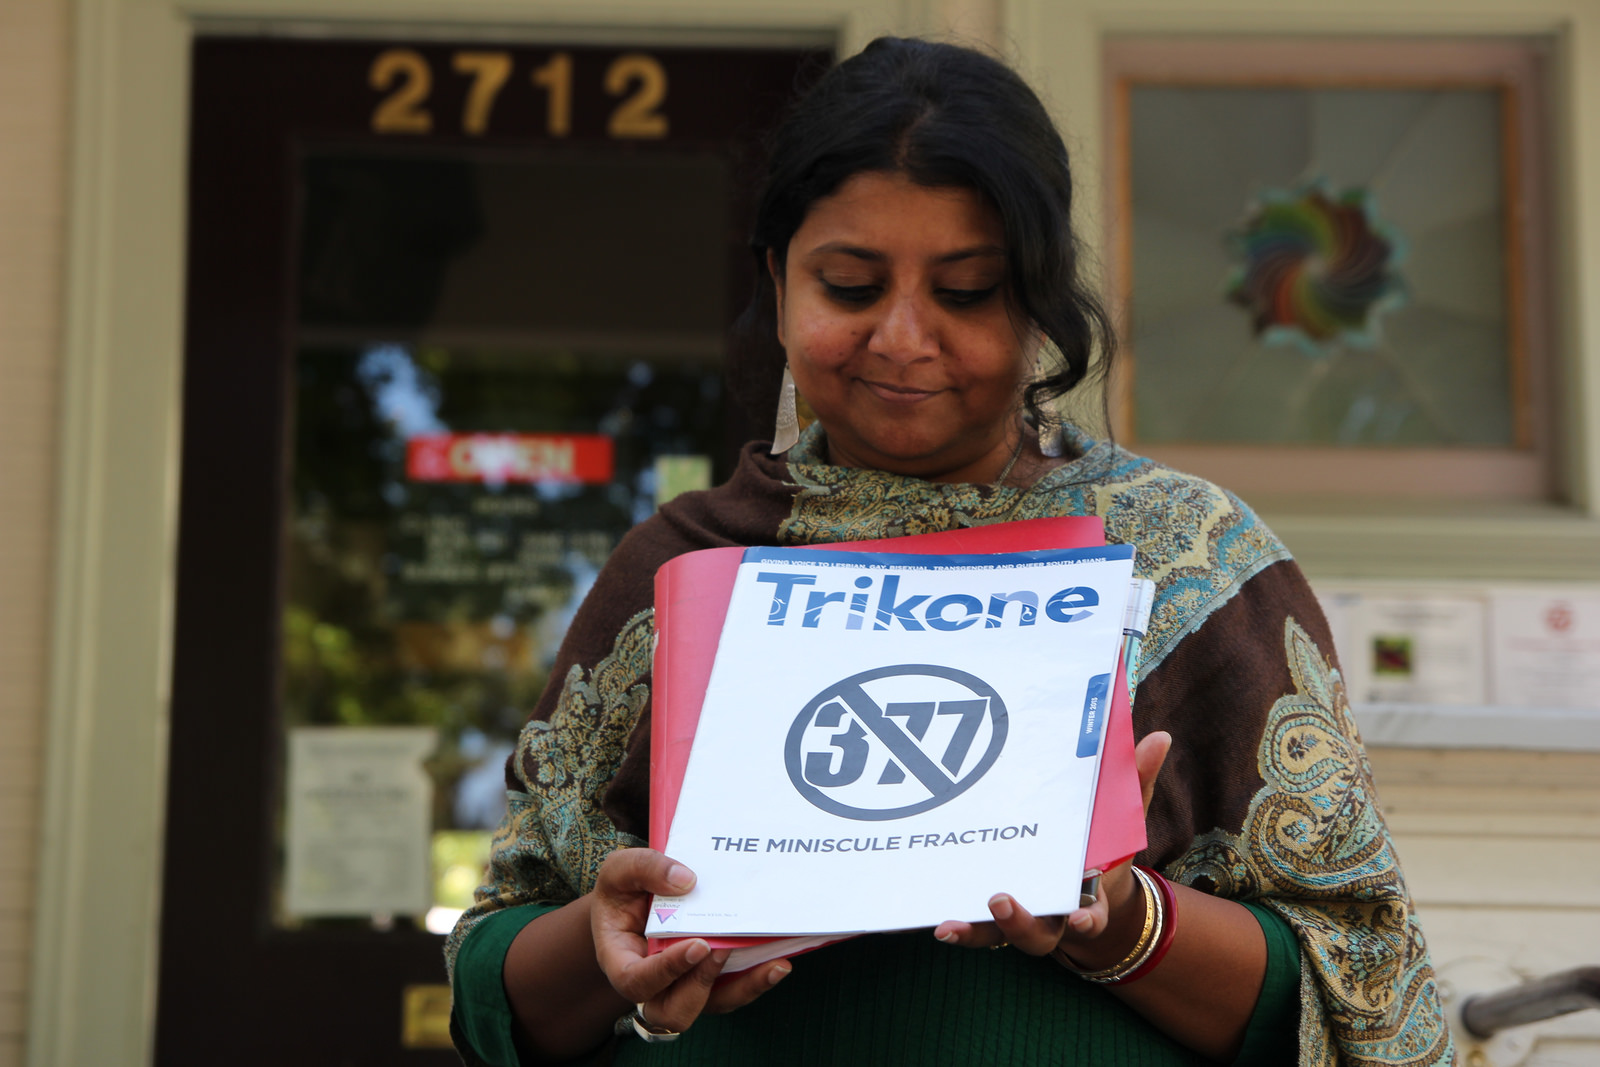 Barnali holds up Trikone’s Newsletter, which features the numbers 377 with a line diagonally crossing it out.